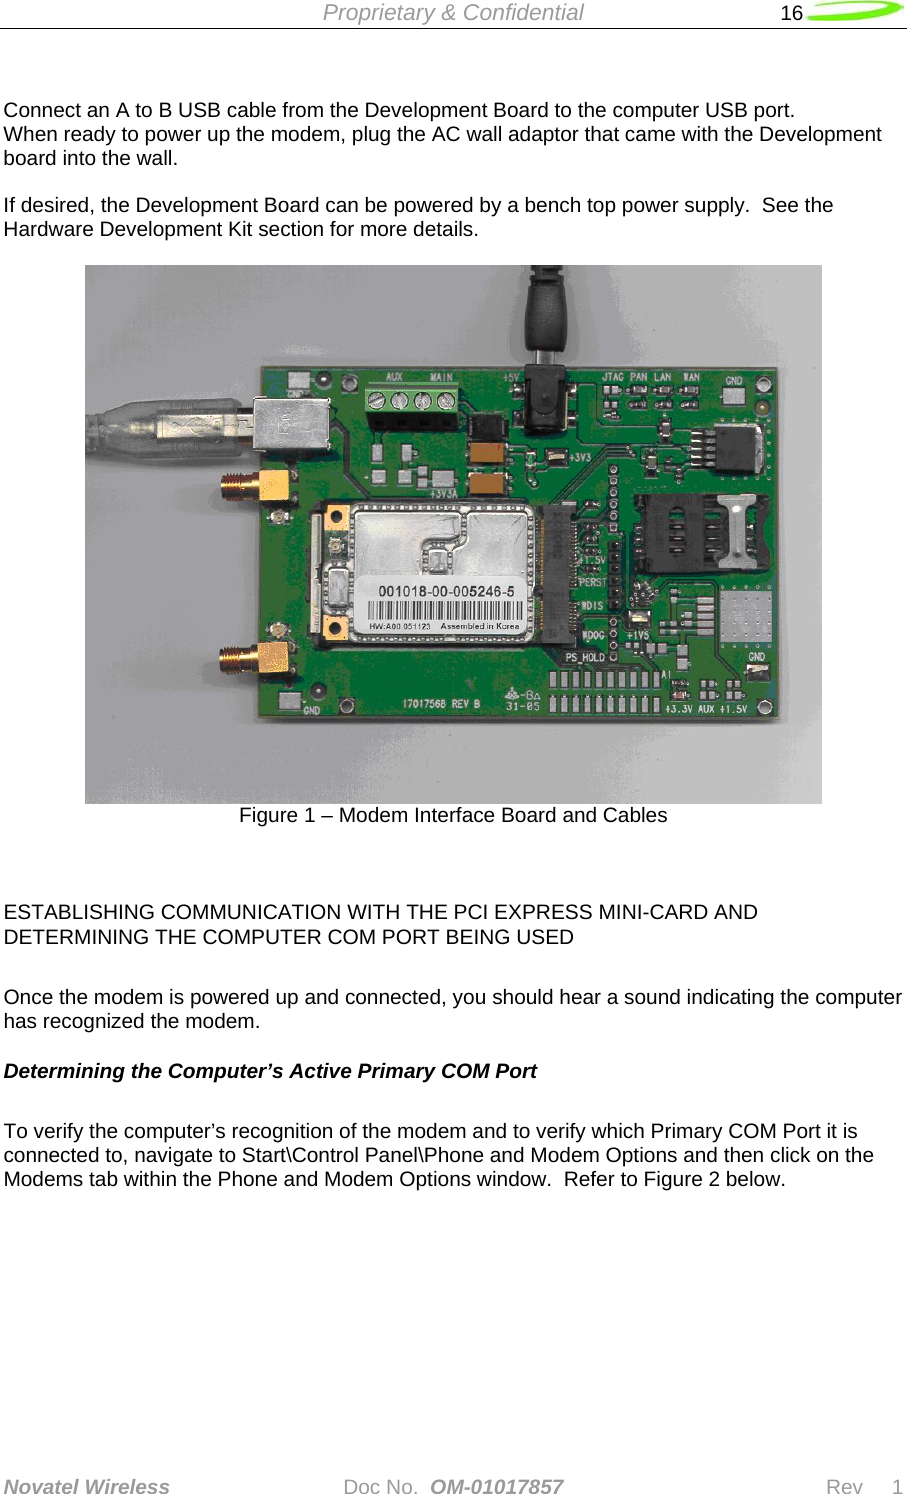  Proprietary &amp; Confidential   16   Novatel Wireless   Doc No.  OM-01017857                              Rev     1   Connect an A to B USB cable from the Development Board to the computer USB port. When ready to power up the modem, plug the AC wall adaptor that came with the Development board into the wall.  If desired, the Development Board can be powered by a bench top power supply.  See the Hardware Development Kit section for more details.   Figure 1 – Modem Interface Board and Cables       ESTABLISHING COMMUNICATION WITH THE PCI EXPRESS MINI-CARD AND DETERMINING THE COMPUTER COM PORT BEING USED  Once the modem is powered up and connected, you should hear a sound indicating the computer has recognized the modem.    Determining the Computer’s Active Primary COM Port  To verify the computer’s recognition of the modem and to verify which Primary COM Port it is connected to, navigate to Start\Control Panel\Phone and Modem Options and then click on the Modems tab within the Phone and Modem Options window.  Refer to Figure 2 below.  